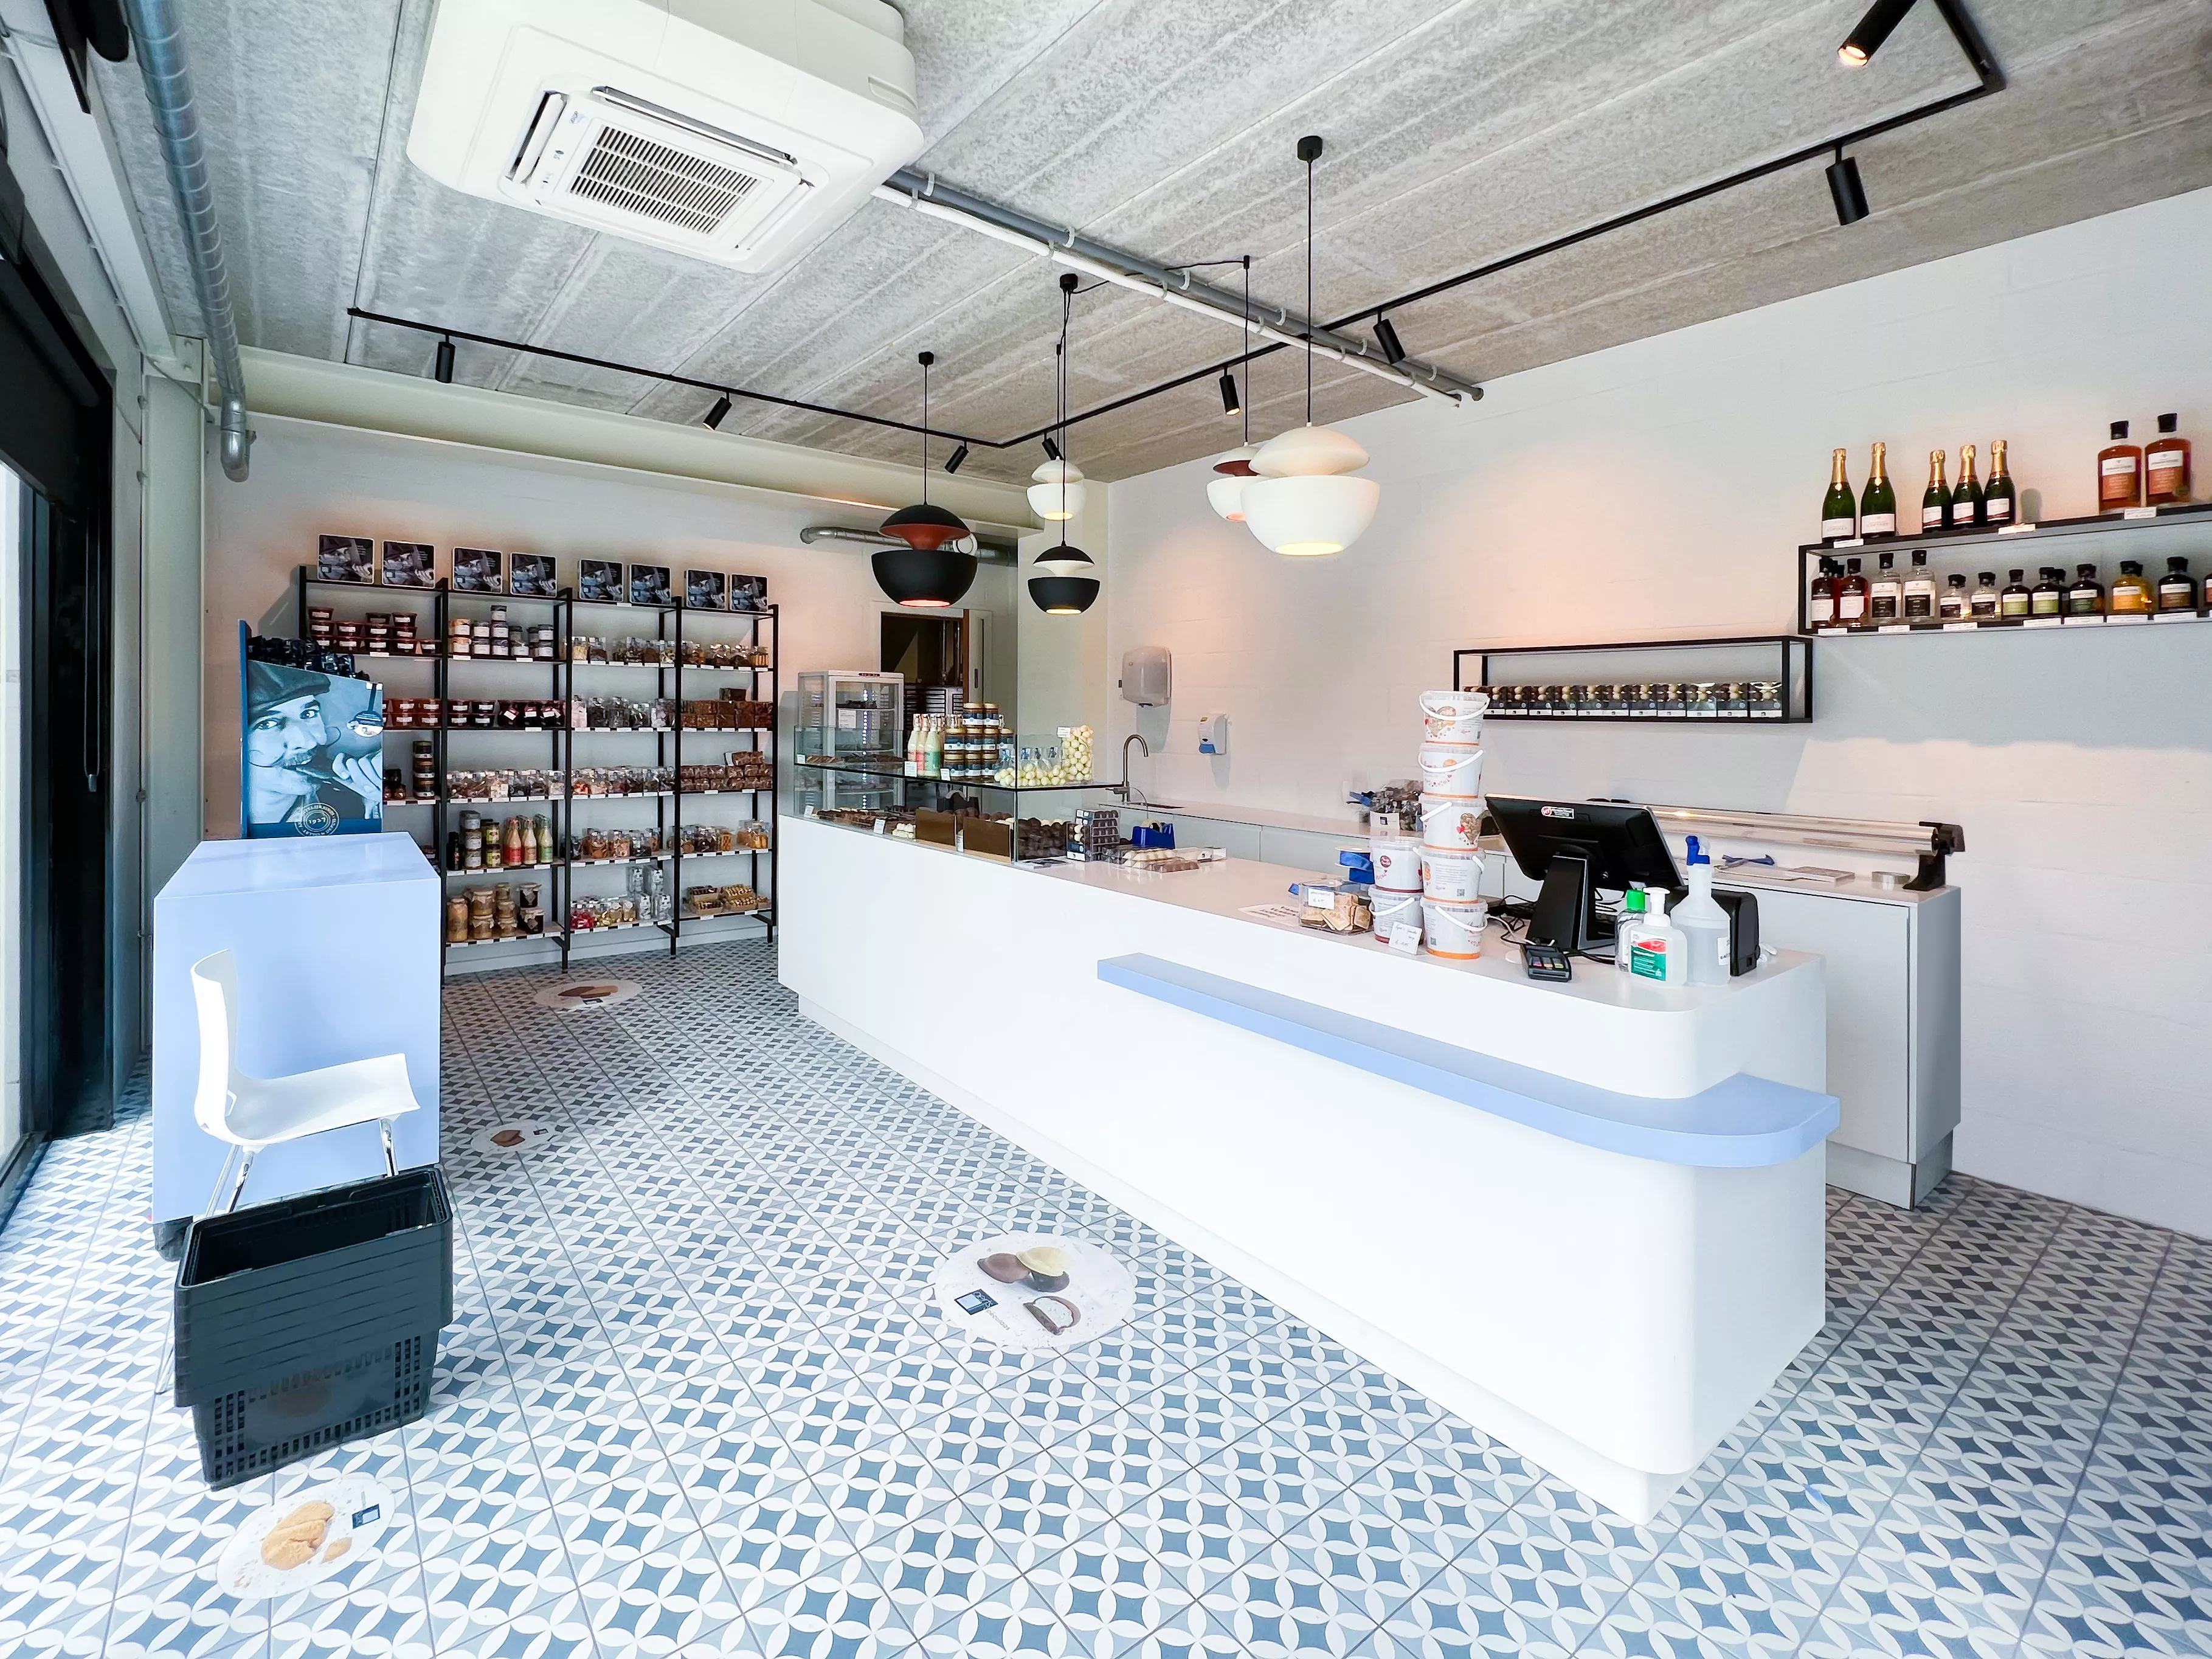 A blend of design and craftsmanship at a Belgian bakery shop with HIMACS at the fore